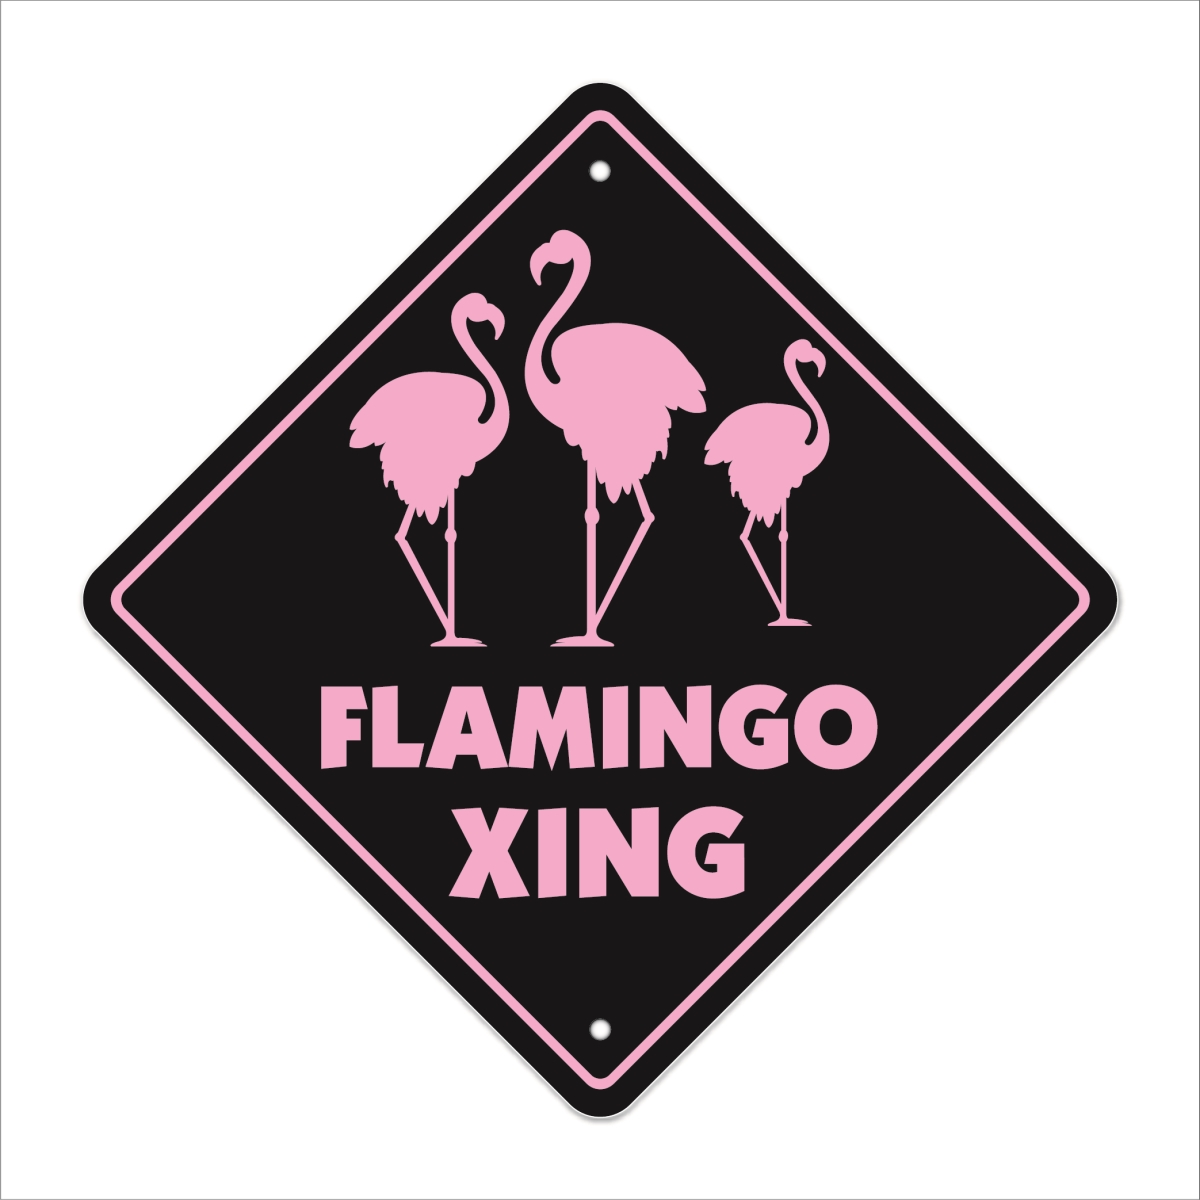 SignMission X-Flamingo 12 x 12 in. Flamingo Crossing Zone Xing Sign